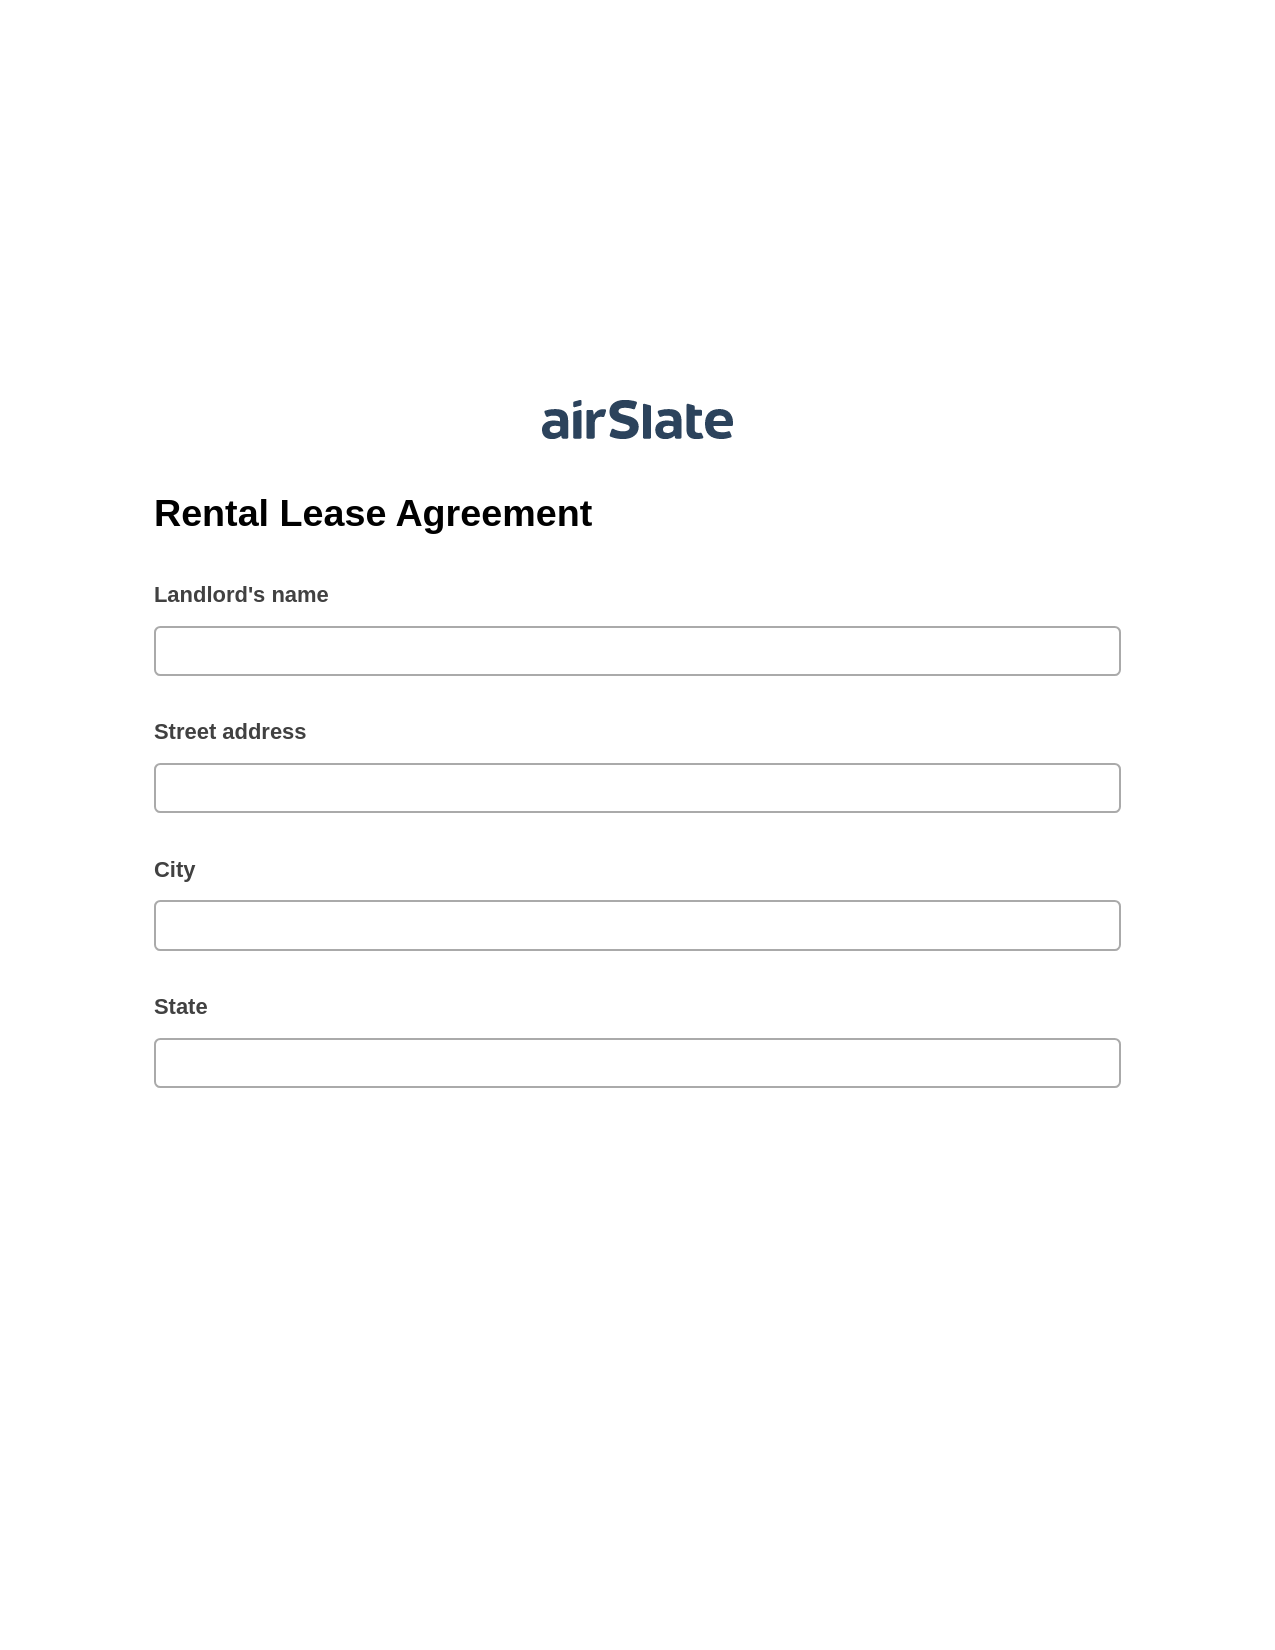 Rental Lease Agreement Pre-fill Dropdown from Airtable, Pre-fill with Custom Data Bot, Box Bot